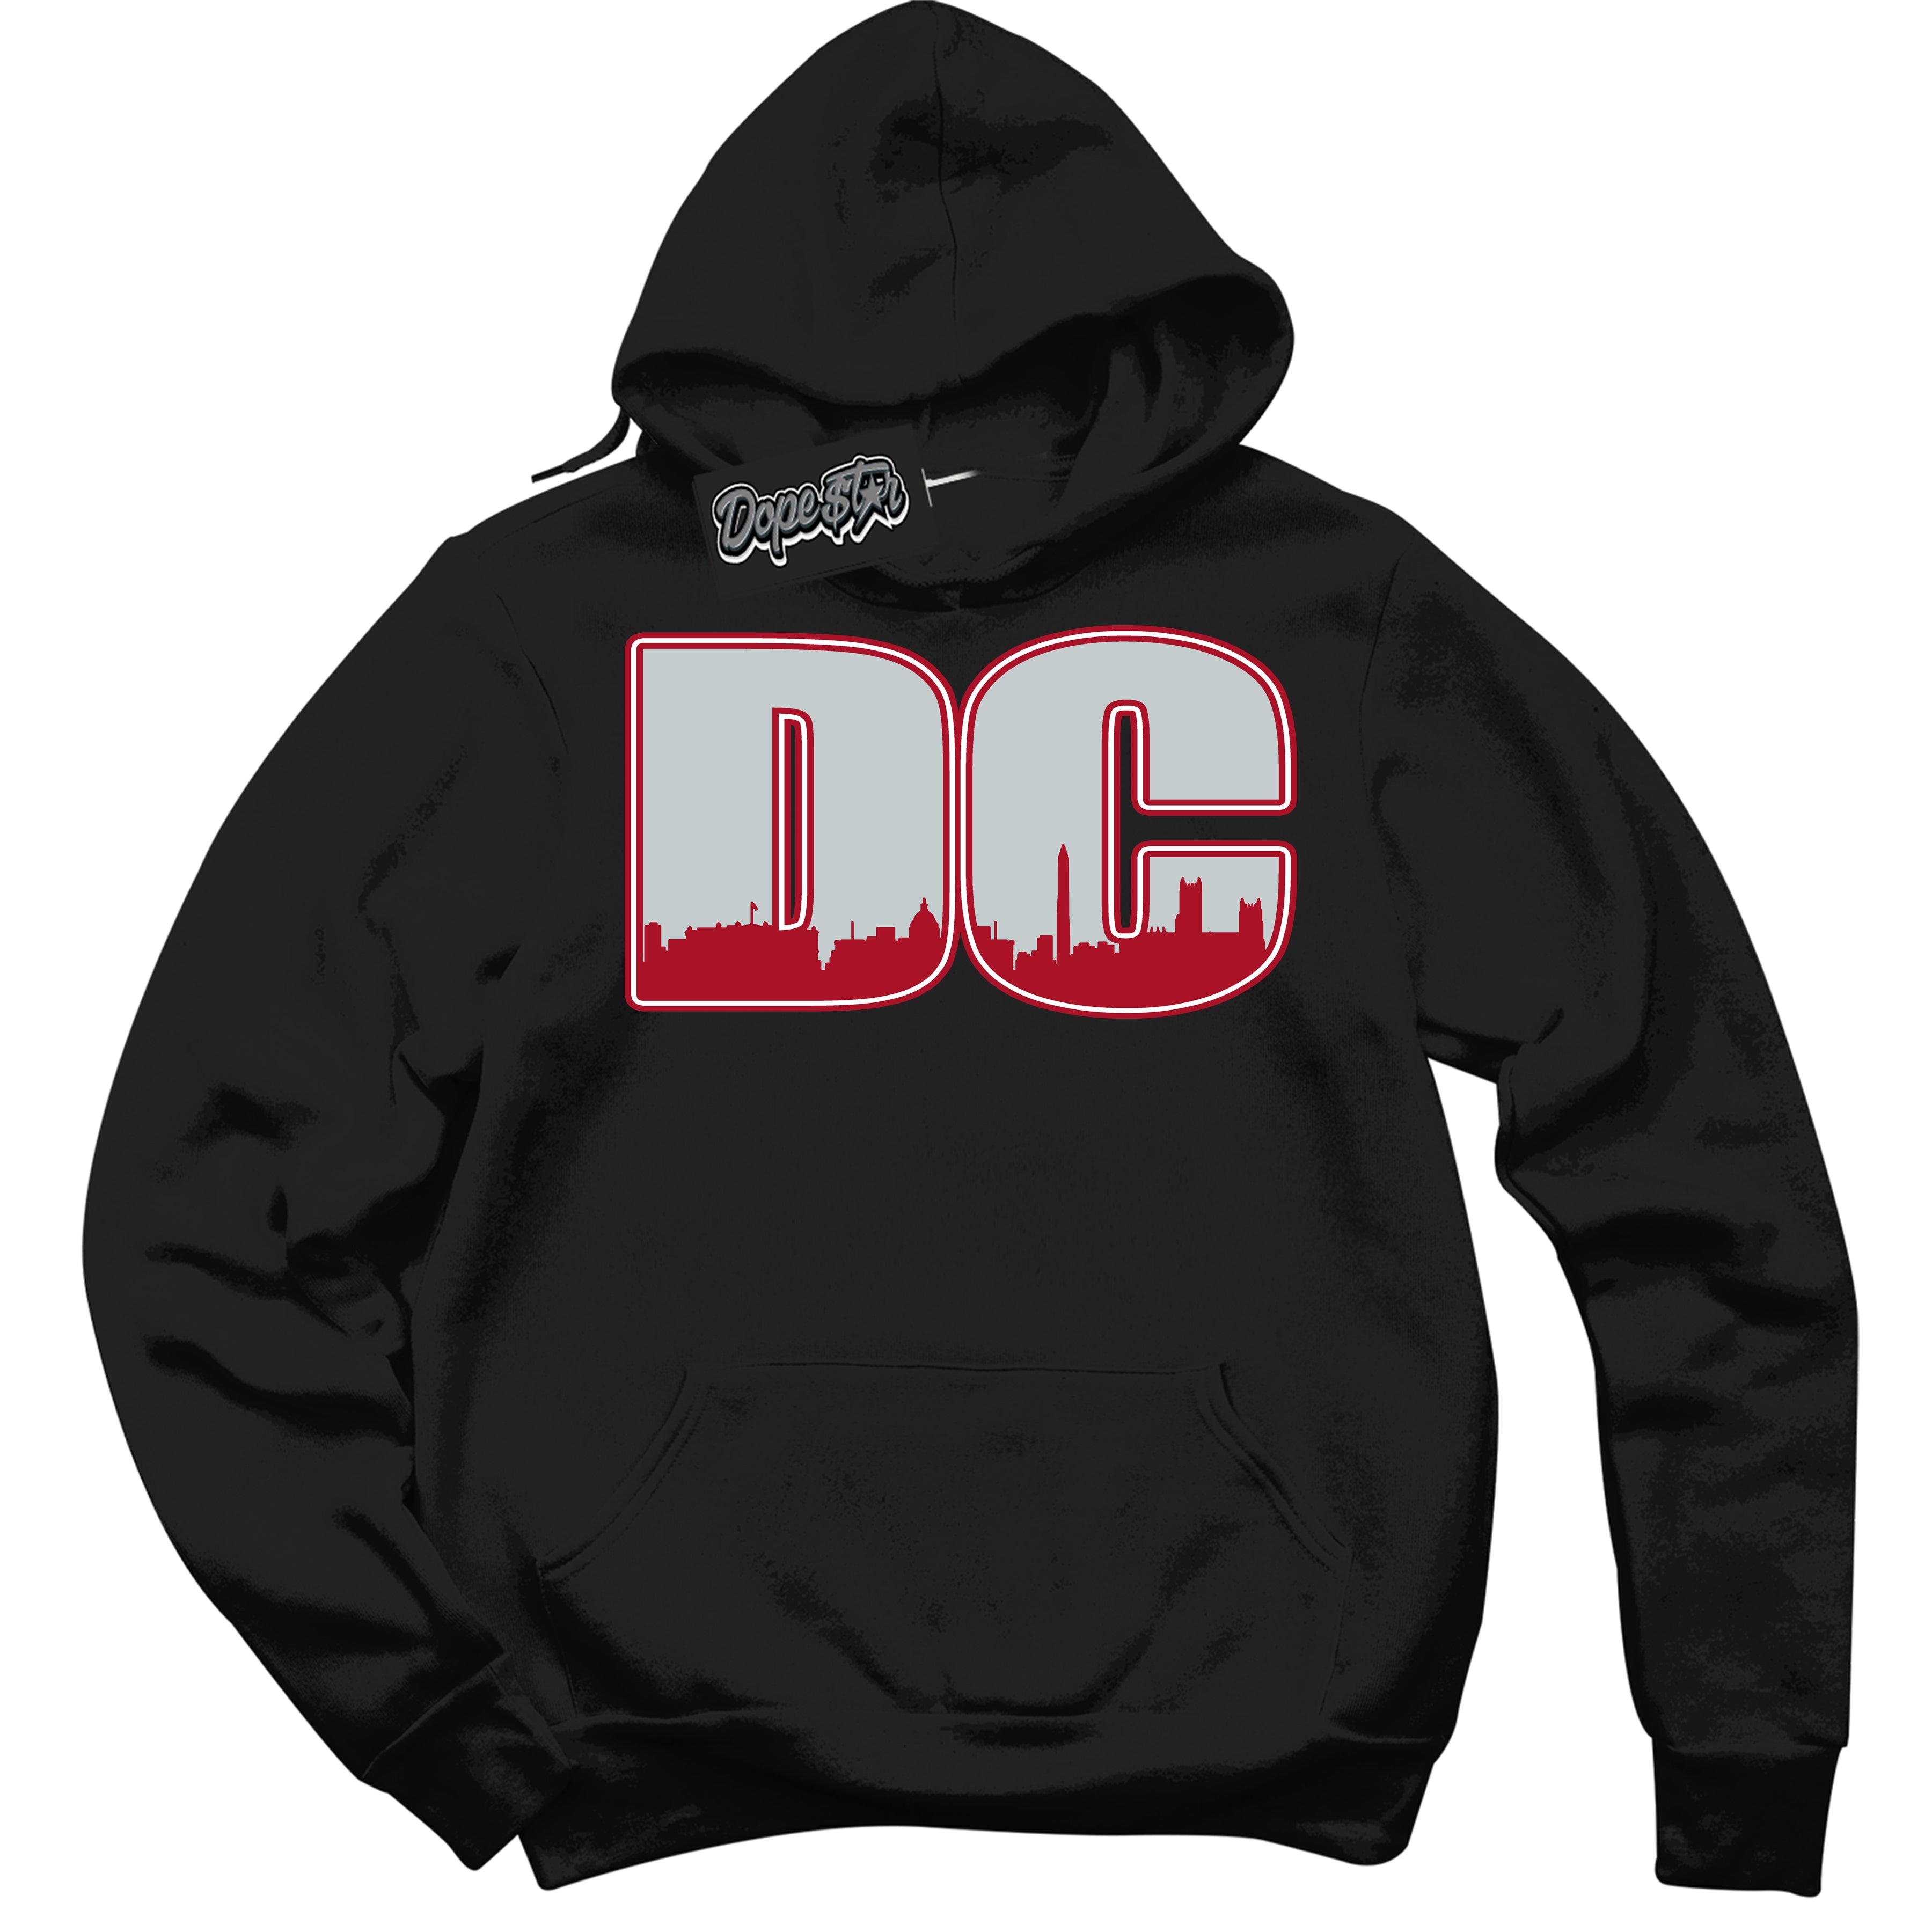 Cool Black Hoodie with “ DC ”  design that Perfectly Matches  Reverse Ultraman Sneakers.